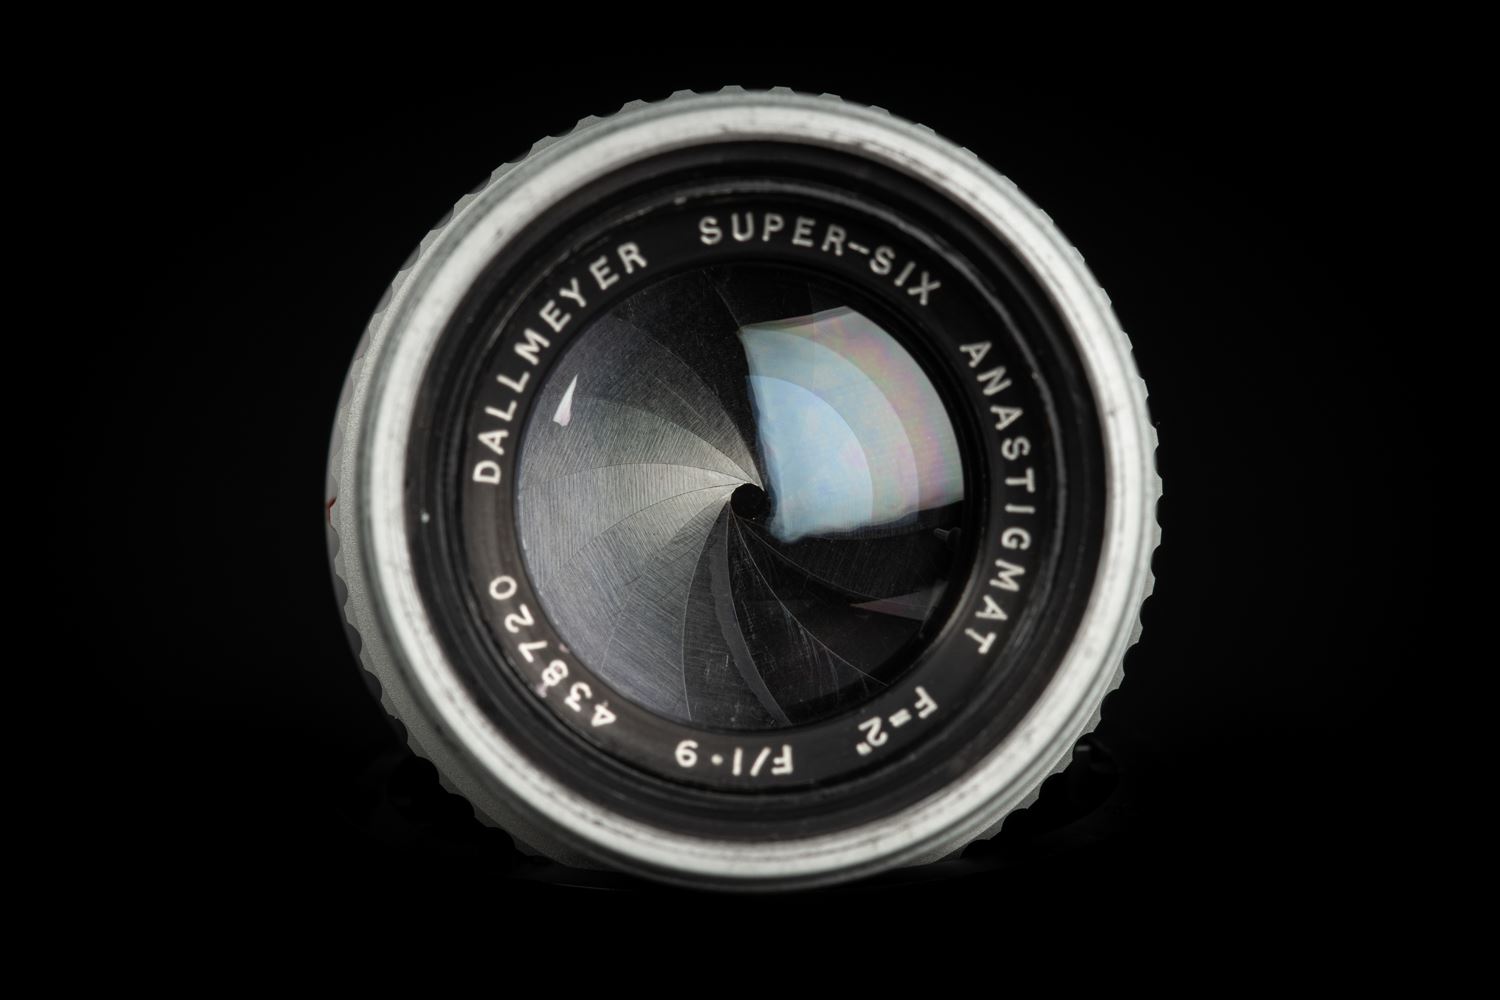 Picture of Dallmeyer Super-Six 50mm f/1.9 Modified to Leica M